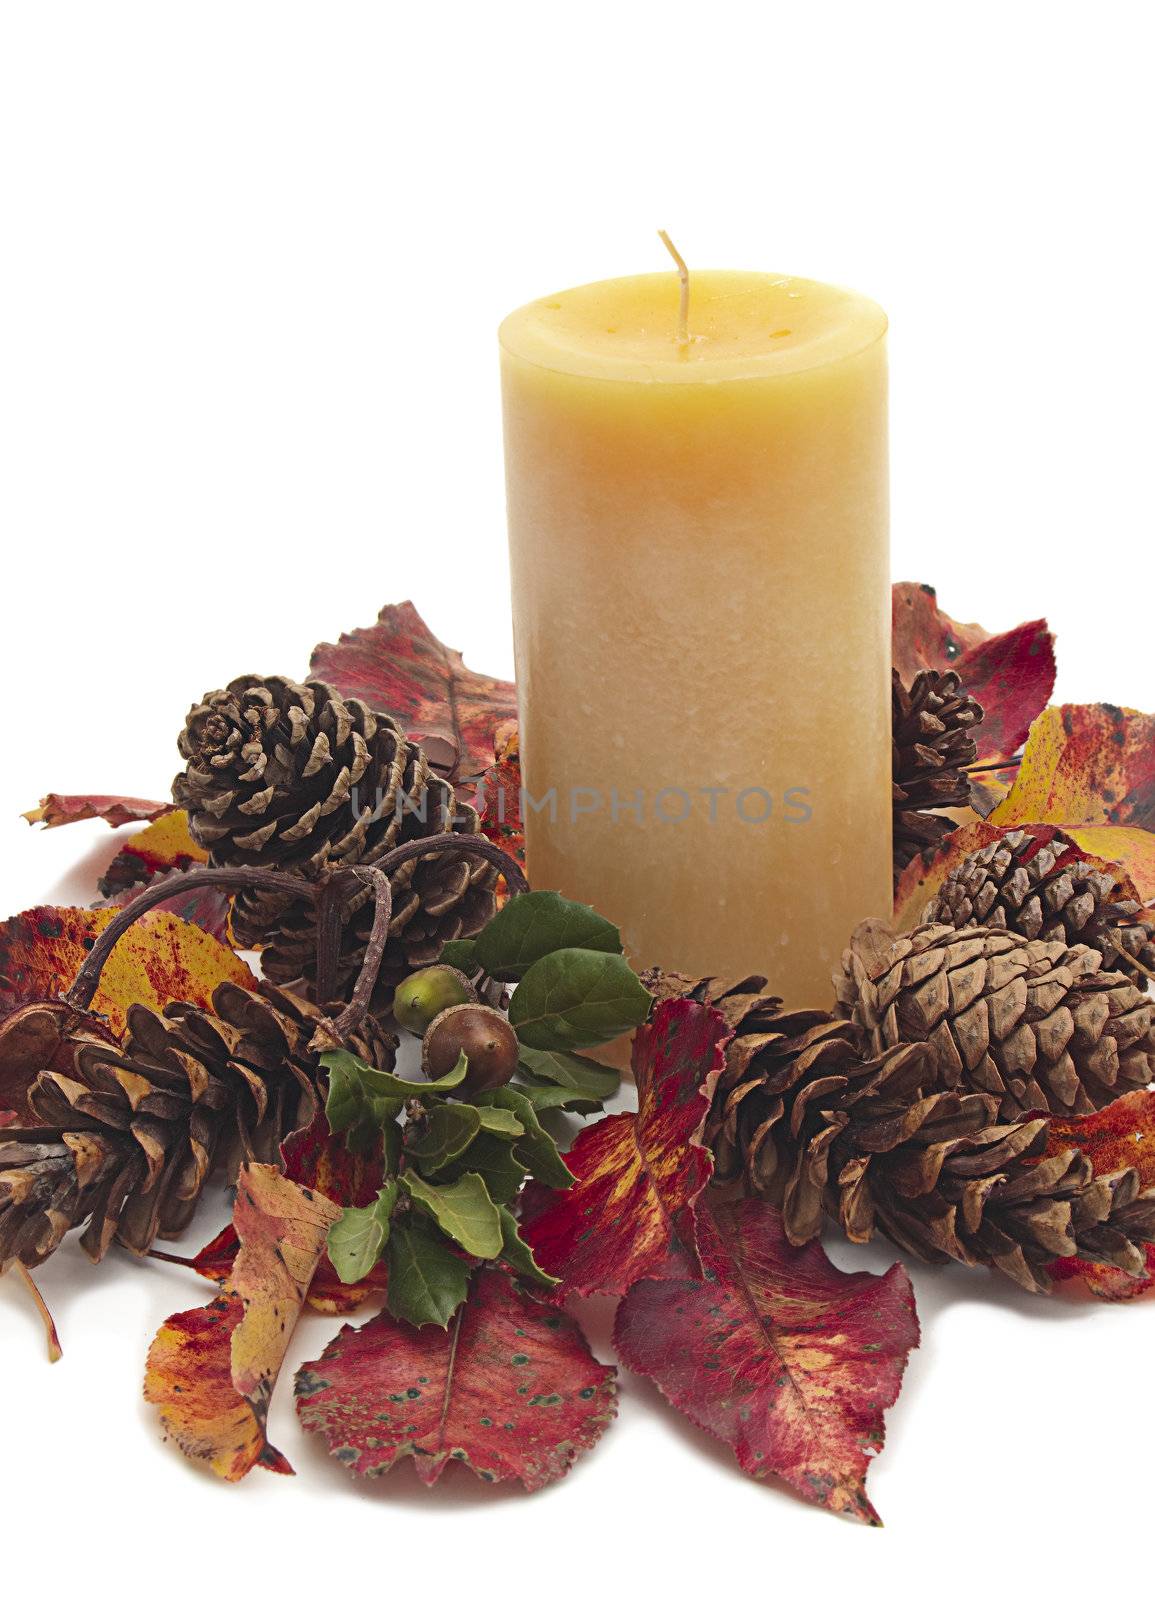 Pillar candle with autumn leaves and pine cones by waxart